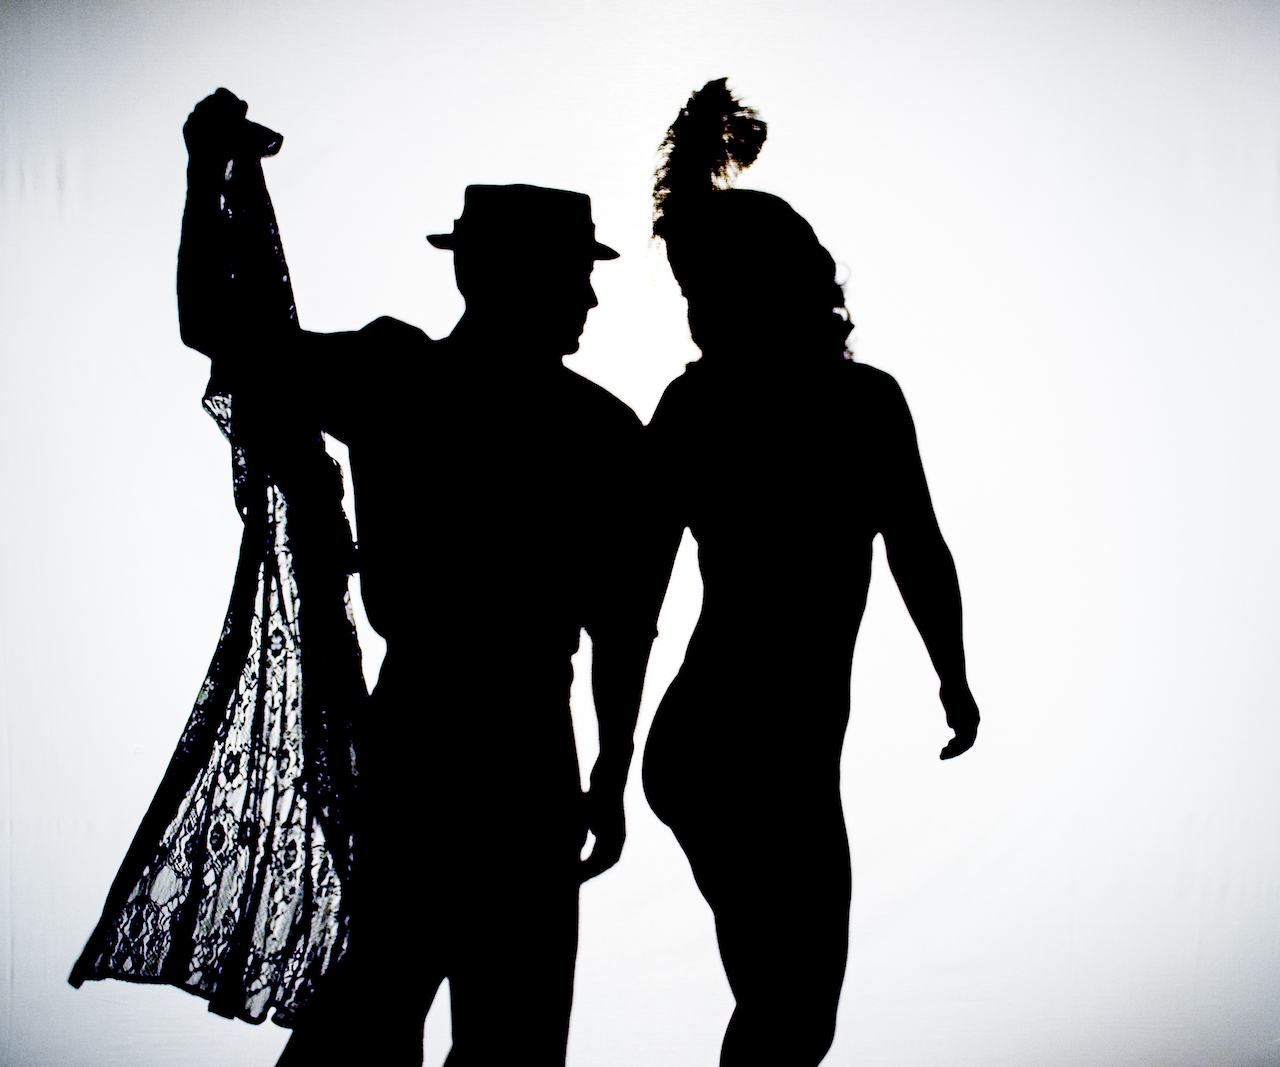 Shadow figures of a circus performance duo dancing and removing clothing.